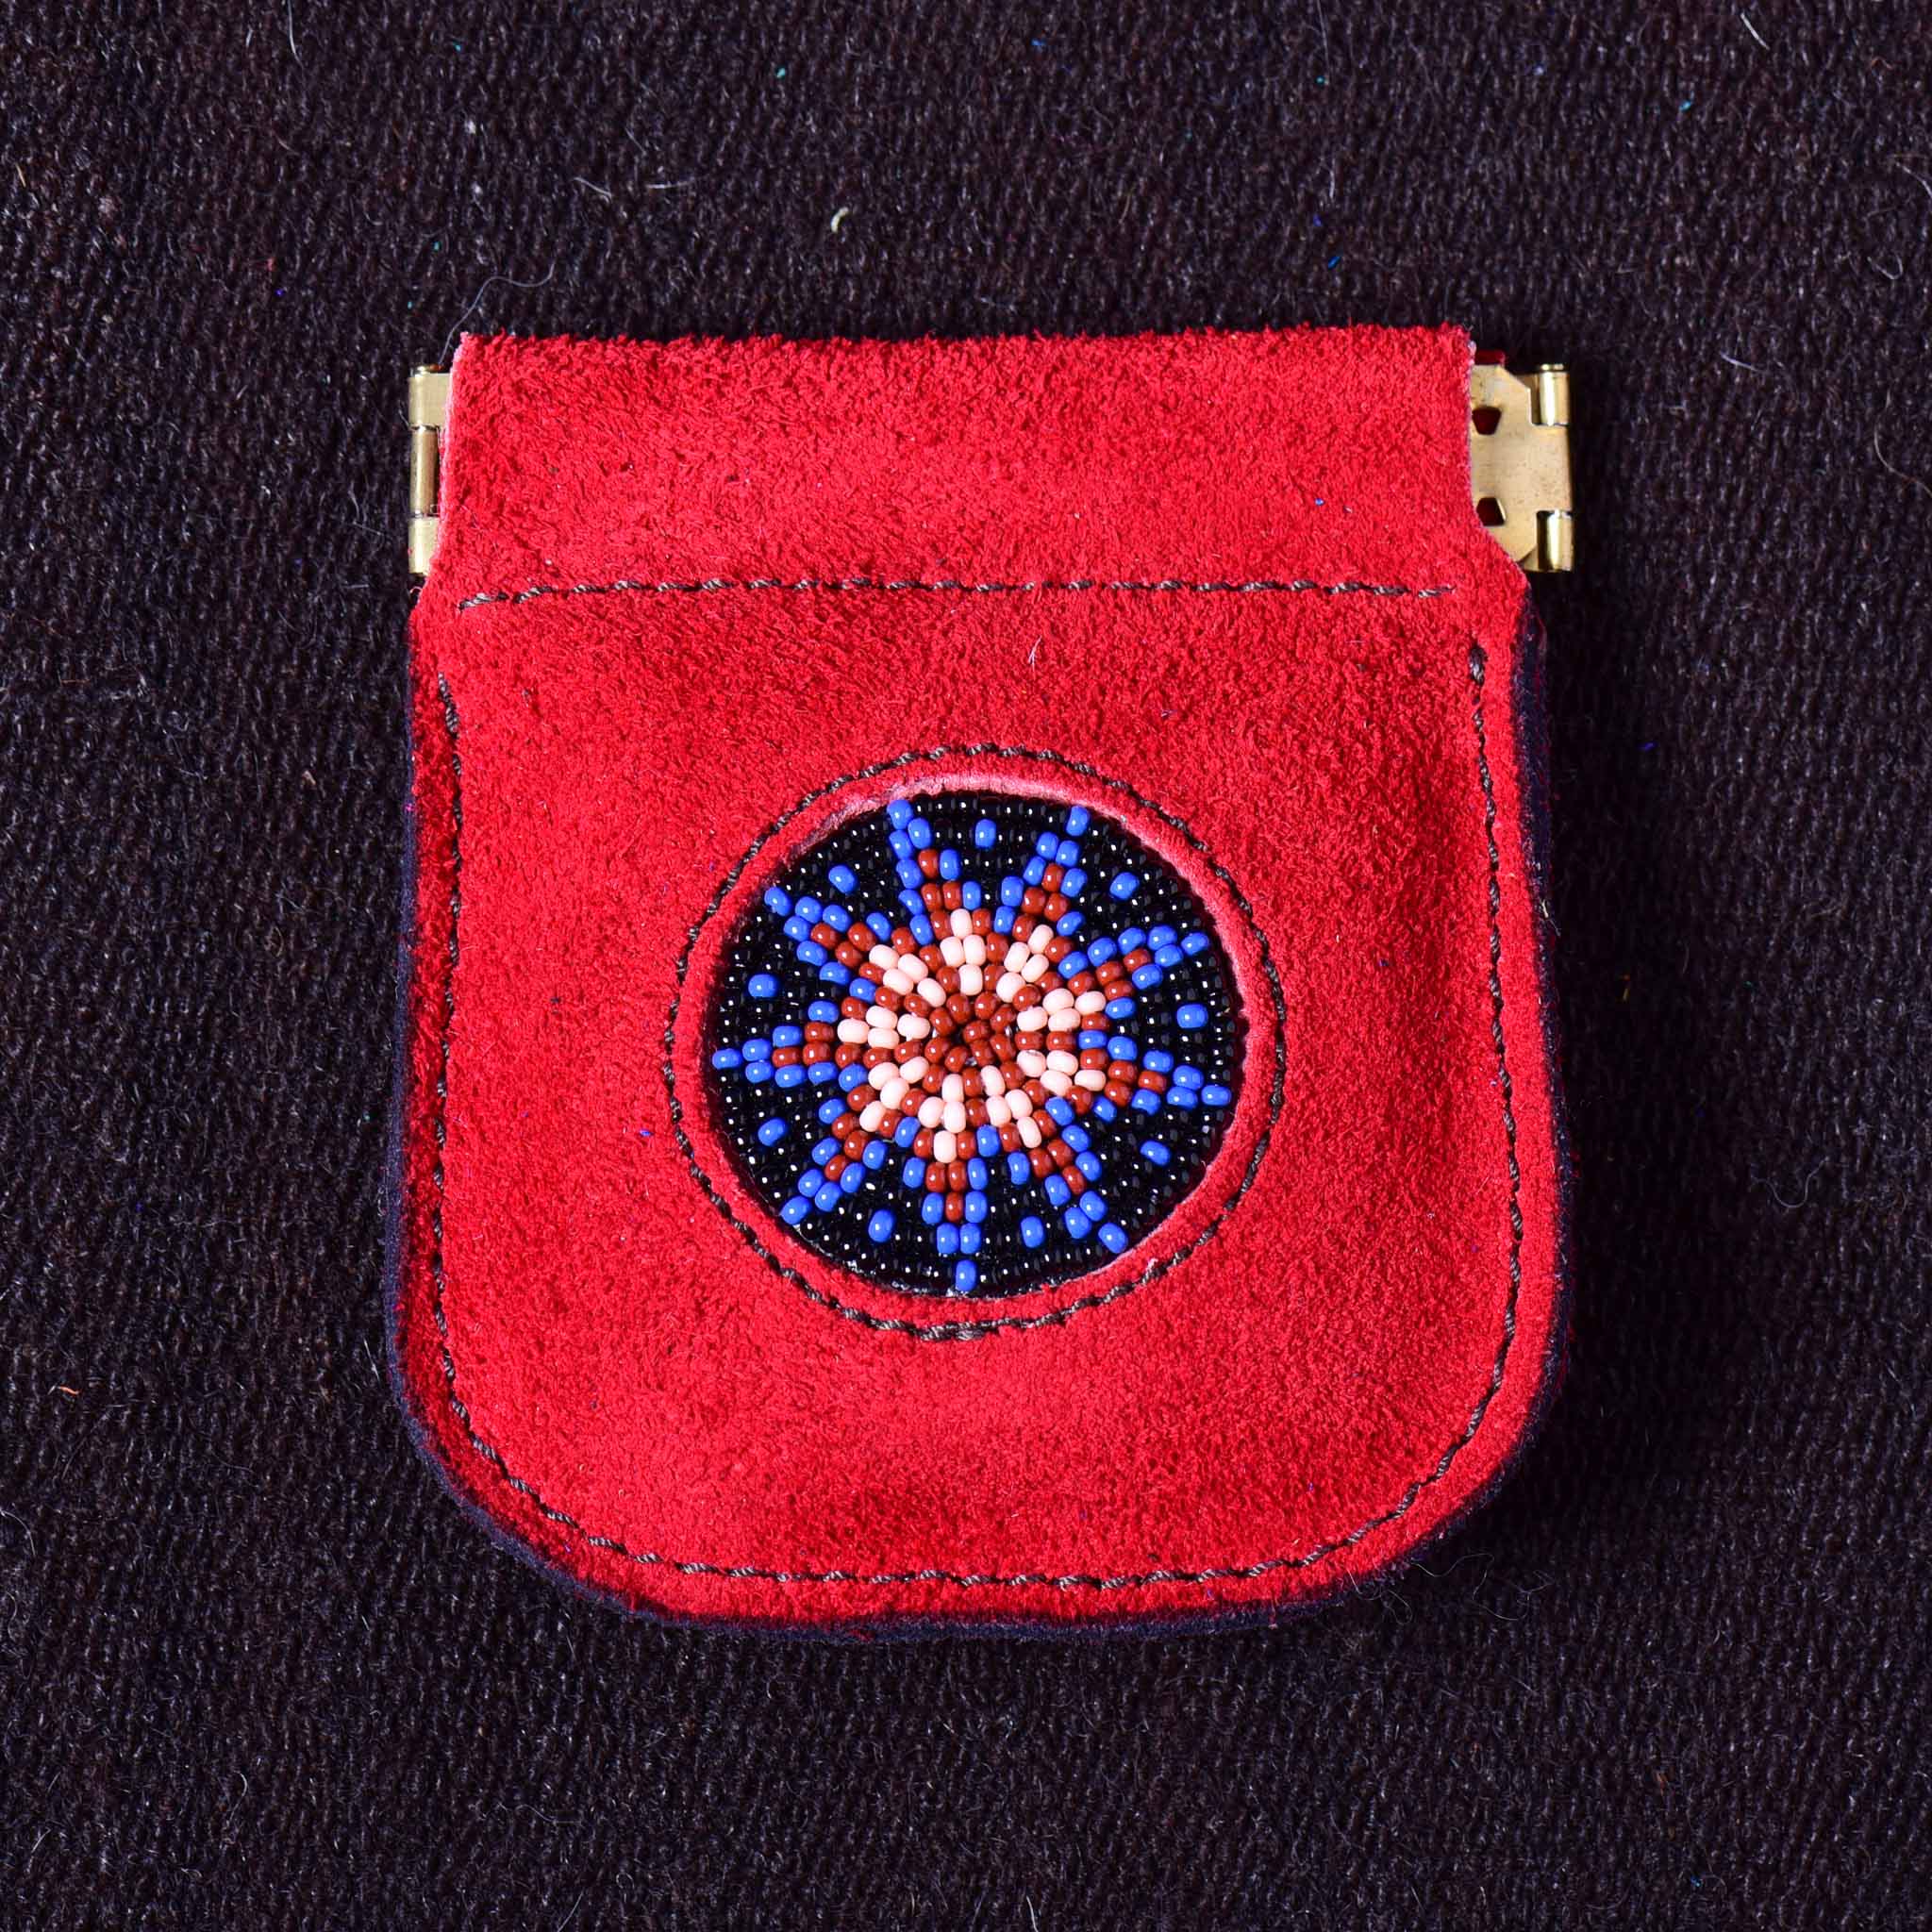 Andino Push - Otavalo Leather Beads Embroidery Purse Red Stars